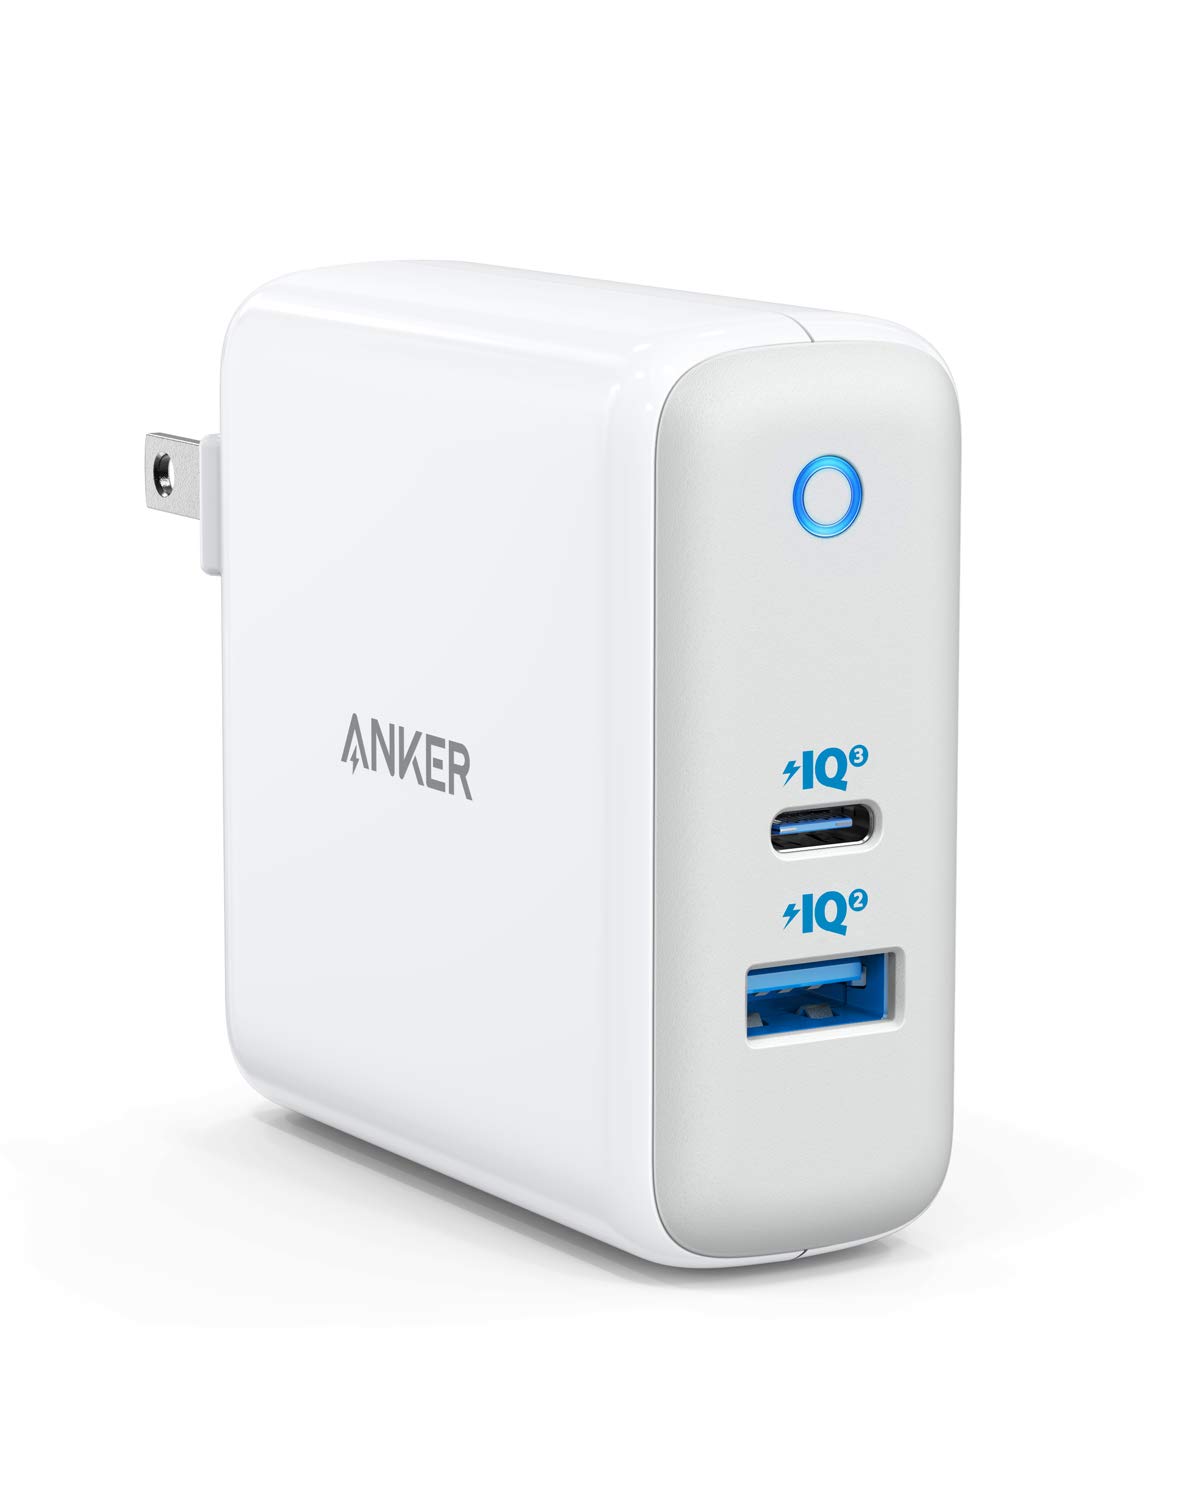 Book Cover Anker 60W PIQ 3.0 & GaN Tech Dual Port Charger, PowerPort Atom III (2 Ports) Travel Charger with a 45W USB C Port, for USB-C Laptops, MacBook, iPad Pro, iPhone, Galaxy, Pixel and More White